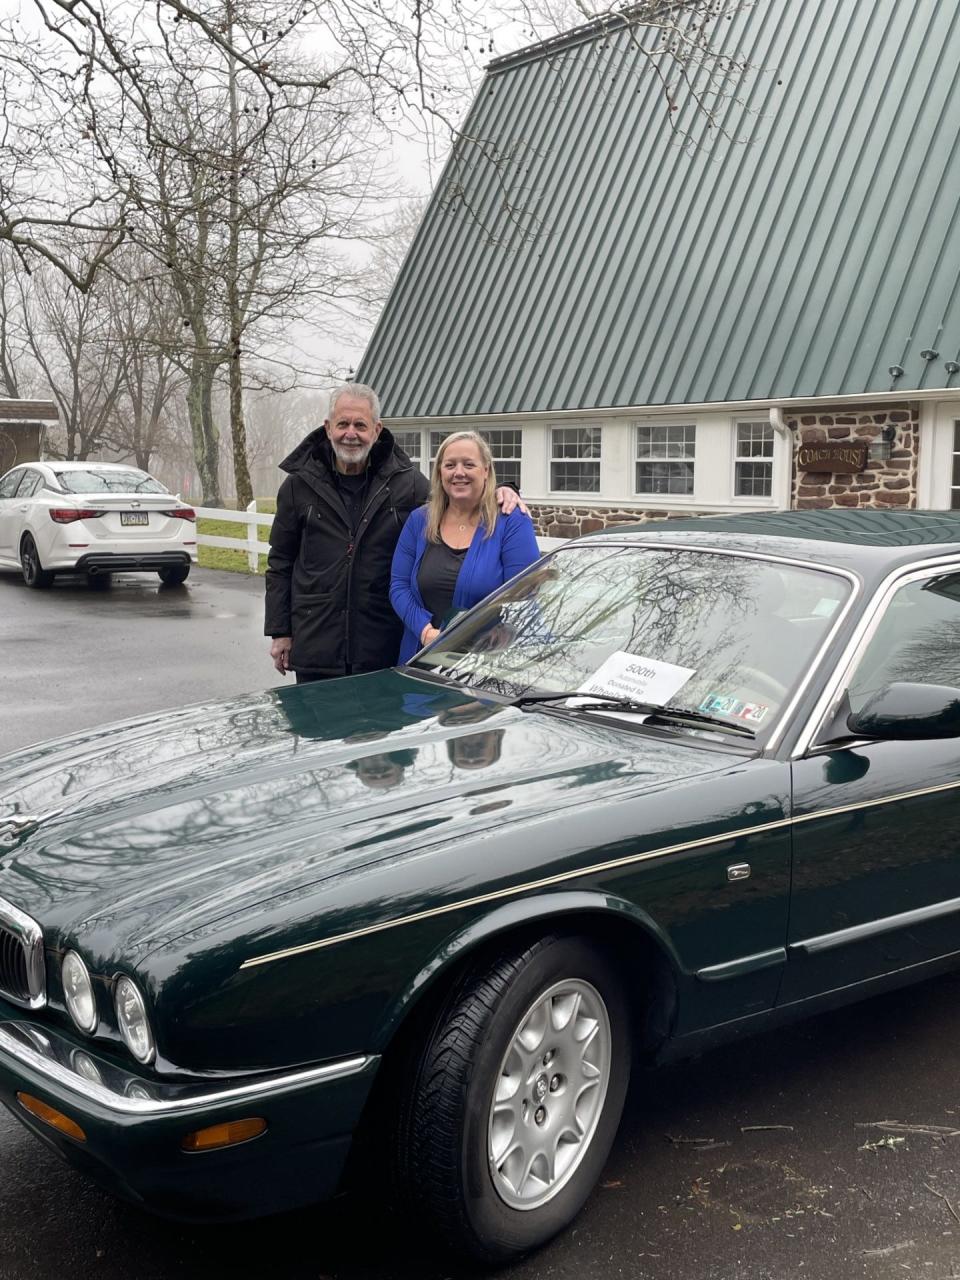 Philanthropist Gene Epstein and Erin Lukoss, CEO of the Bucks County Opportunity Council, stand beside a 1999 Jaguar that Epstein and his wife, Marlene, are donating to a woman being helped by the opportunity council as part of the Wheelz2Work program that Epstein founded to provide donated vehicles to people struggling economically who need a vehicle for employment and to meet educational goals.